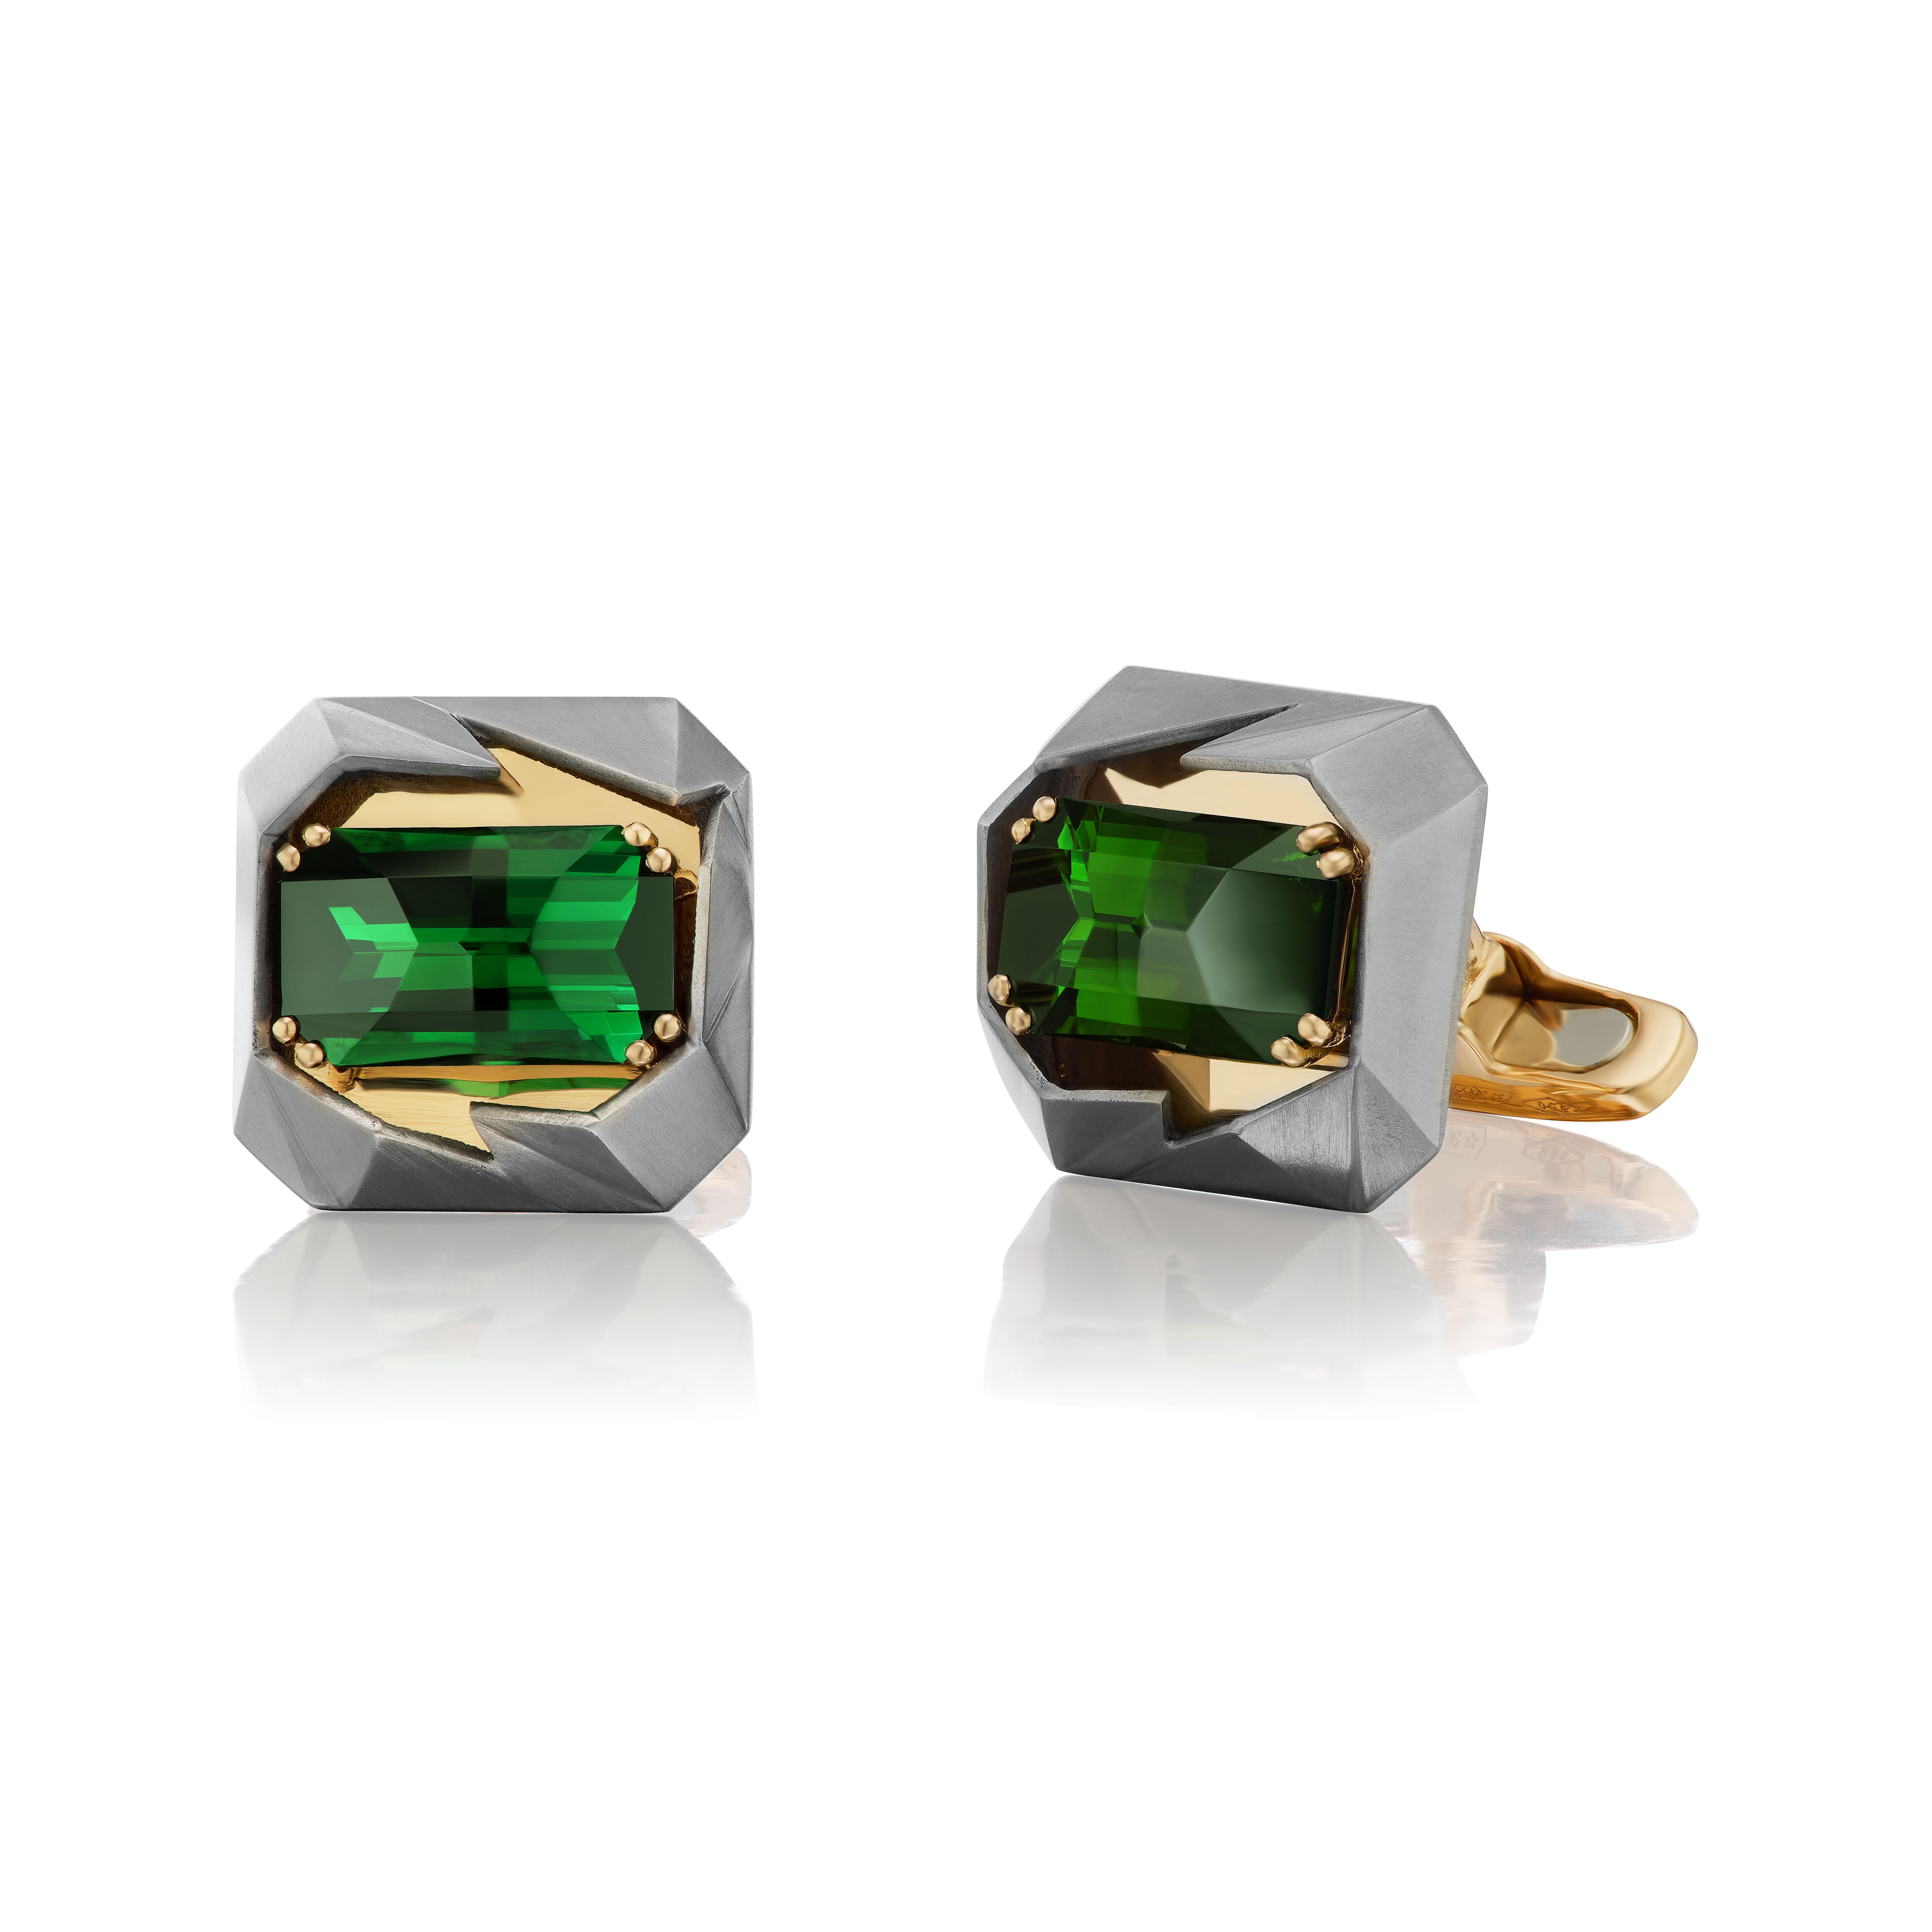 The superiority of modern stone cutting shines through with this exceptional pair of Brazilian green tourmalines.  The original stones weighed app. 7 carats each and were traditional emerald cut shapes.  Recut by master stone cutter Ramon Tesoro,